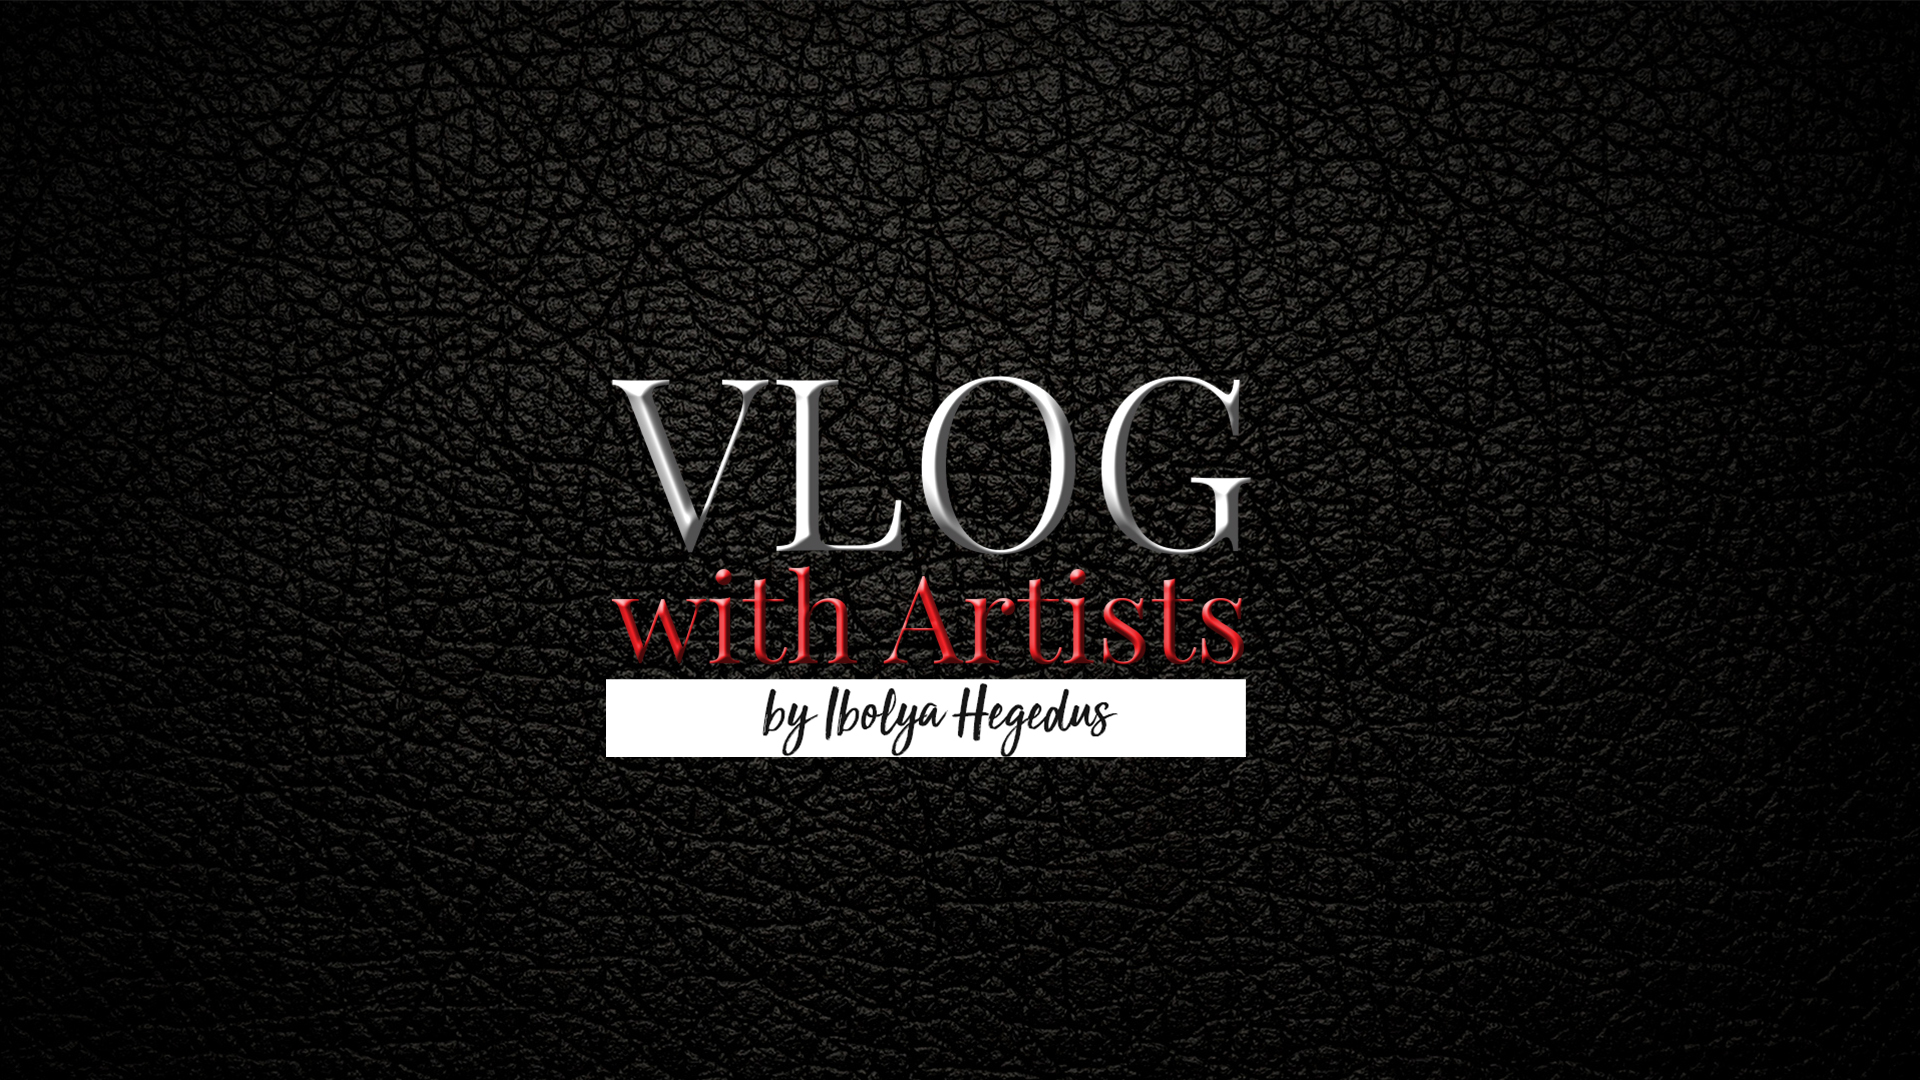 VLOGS WITH ARTISTS BY IBOLYA HEGEDUS